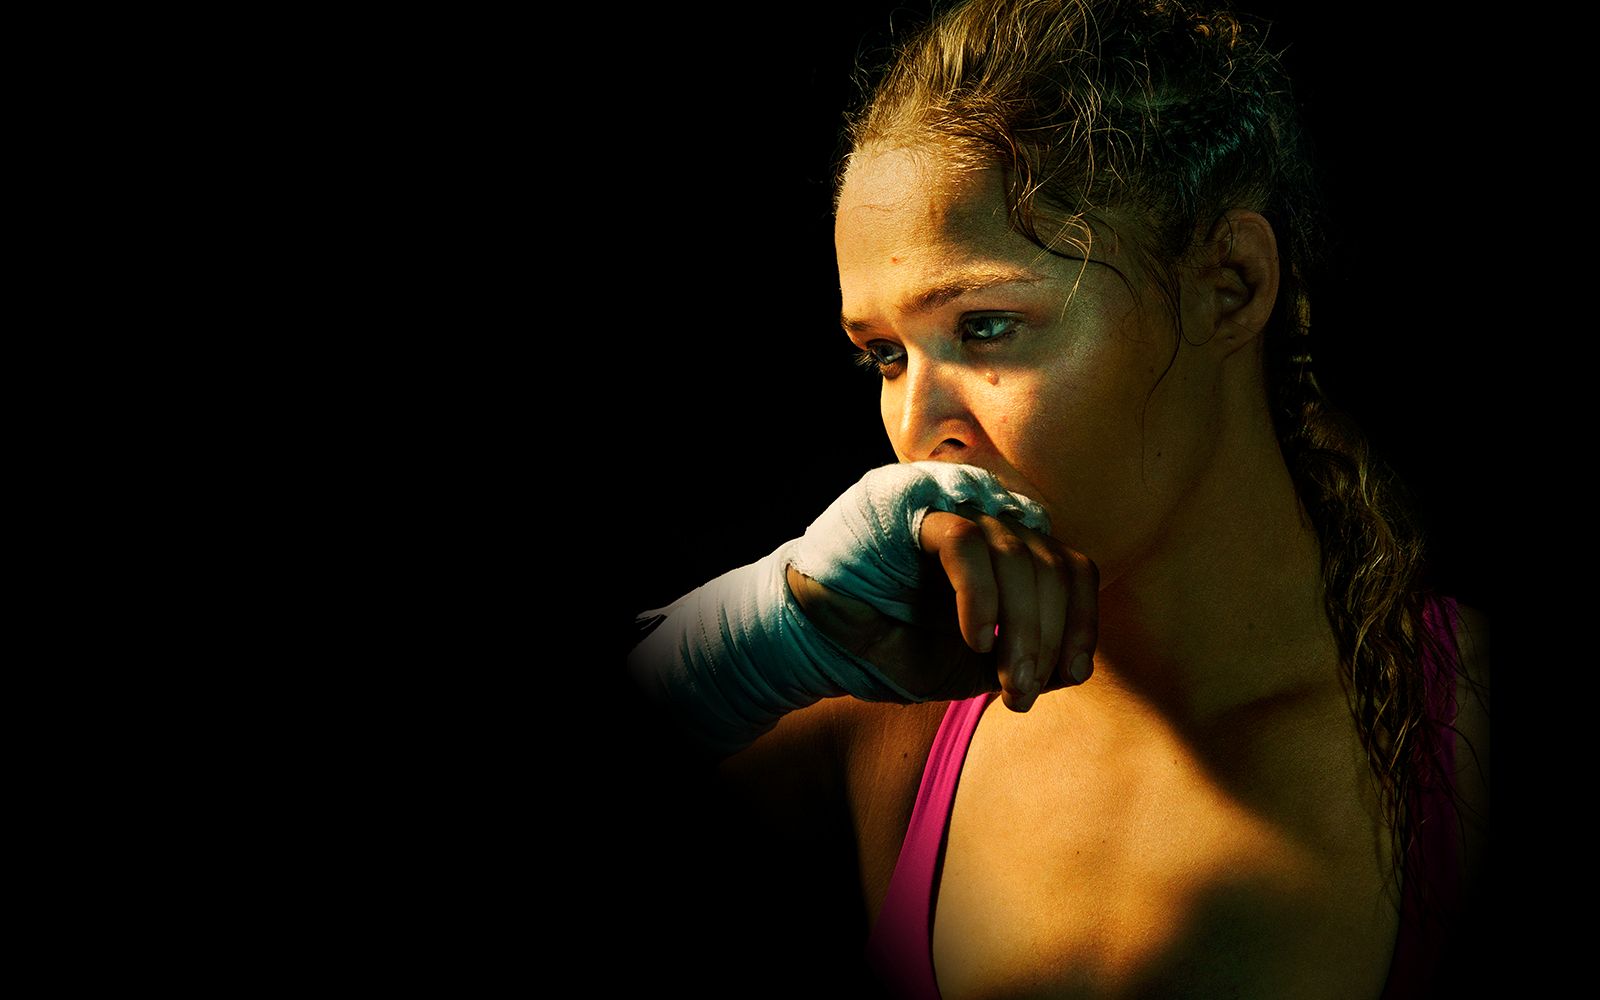 Ronda Rousey Should Go To WWE if Finished in UFC